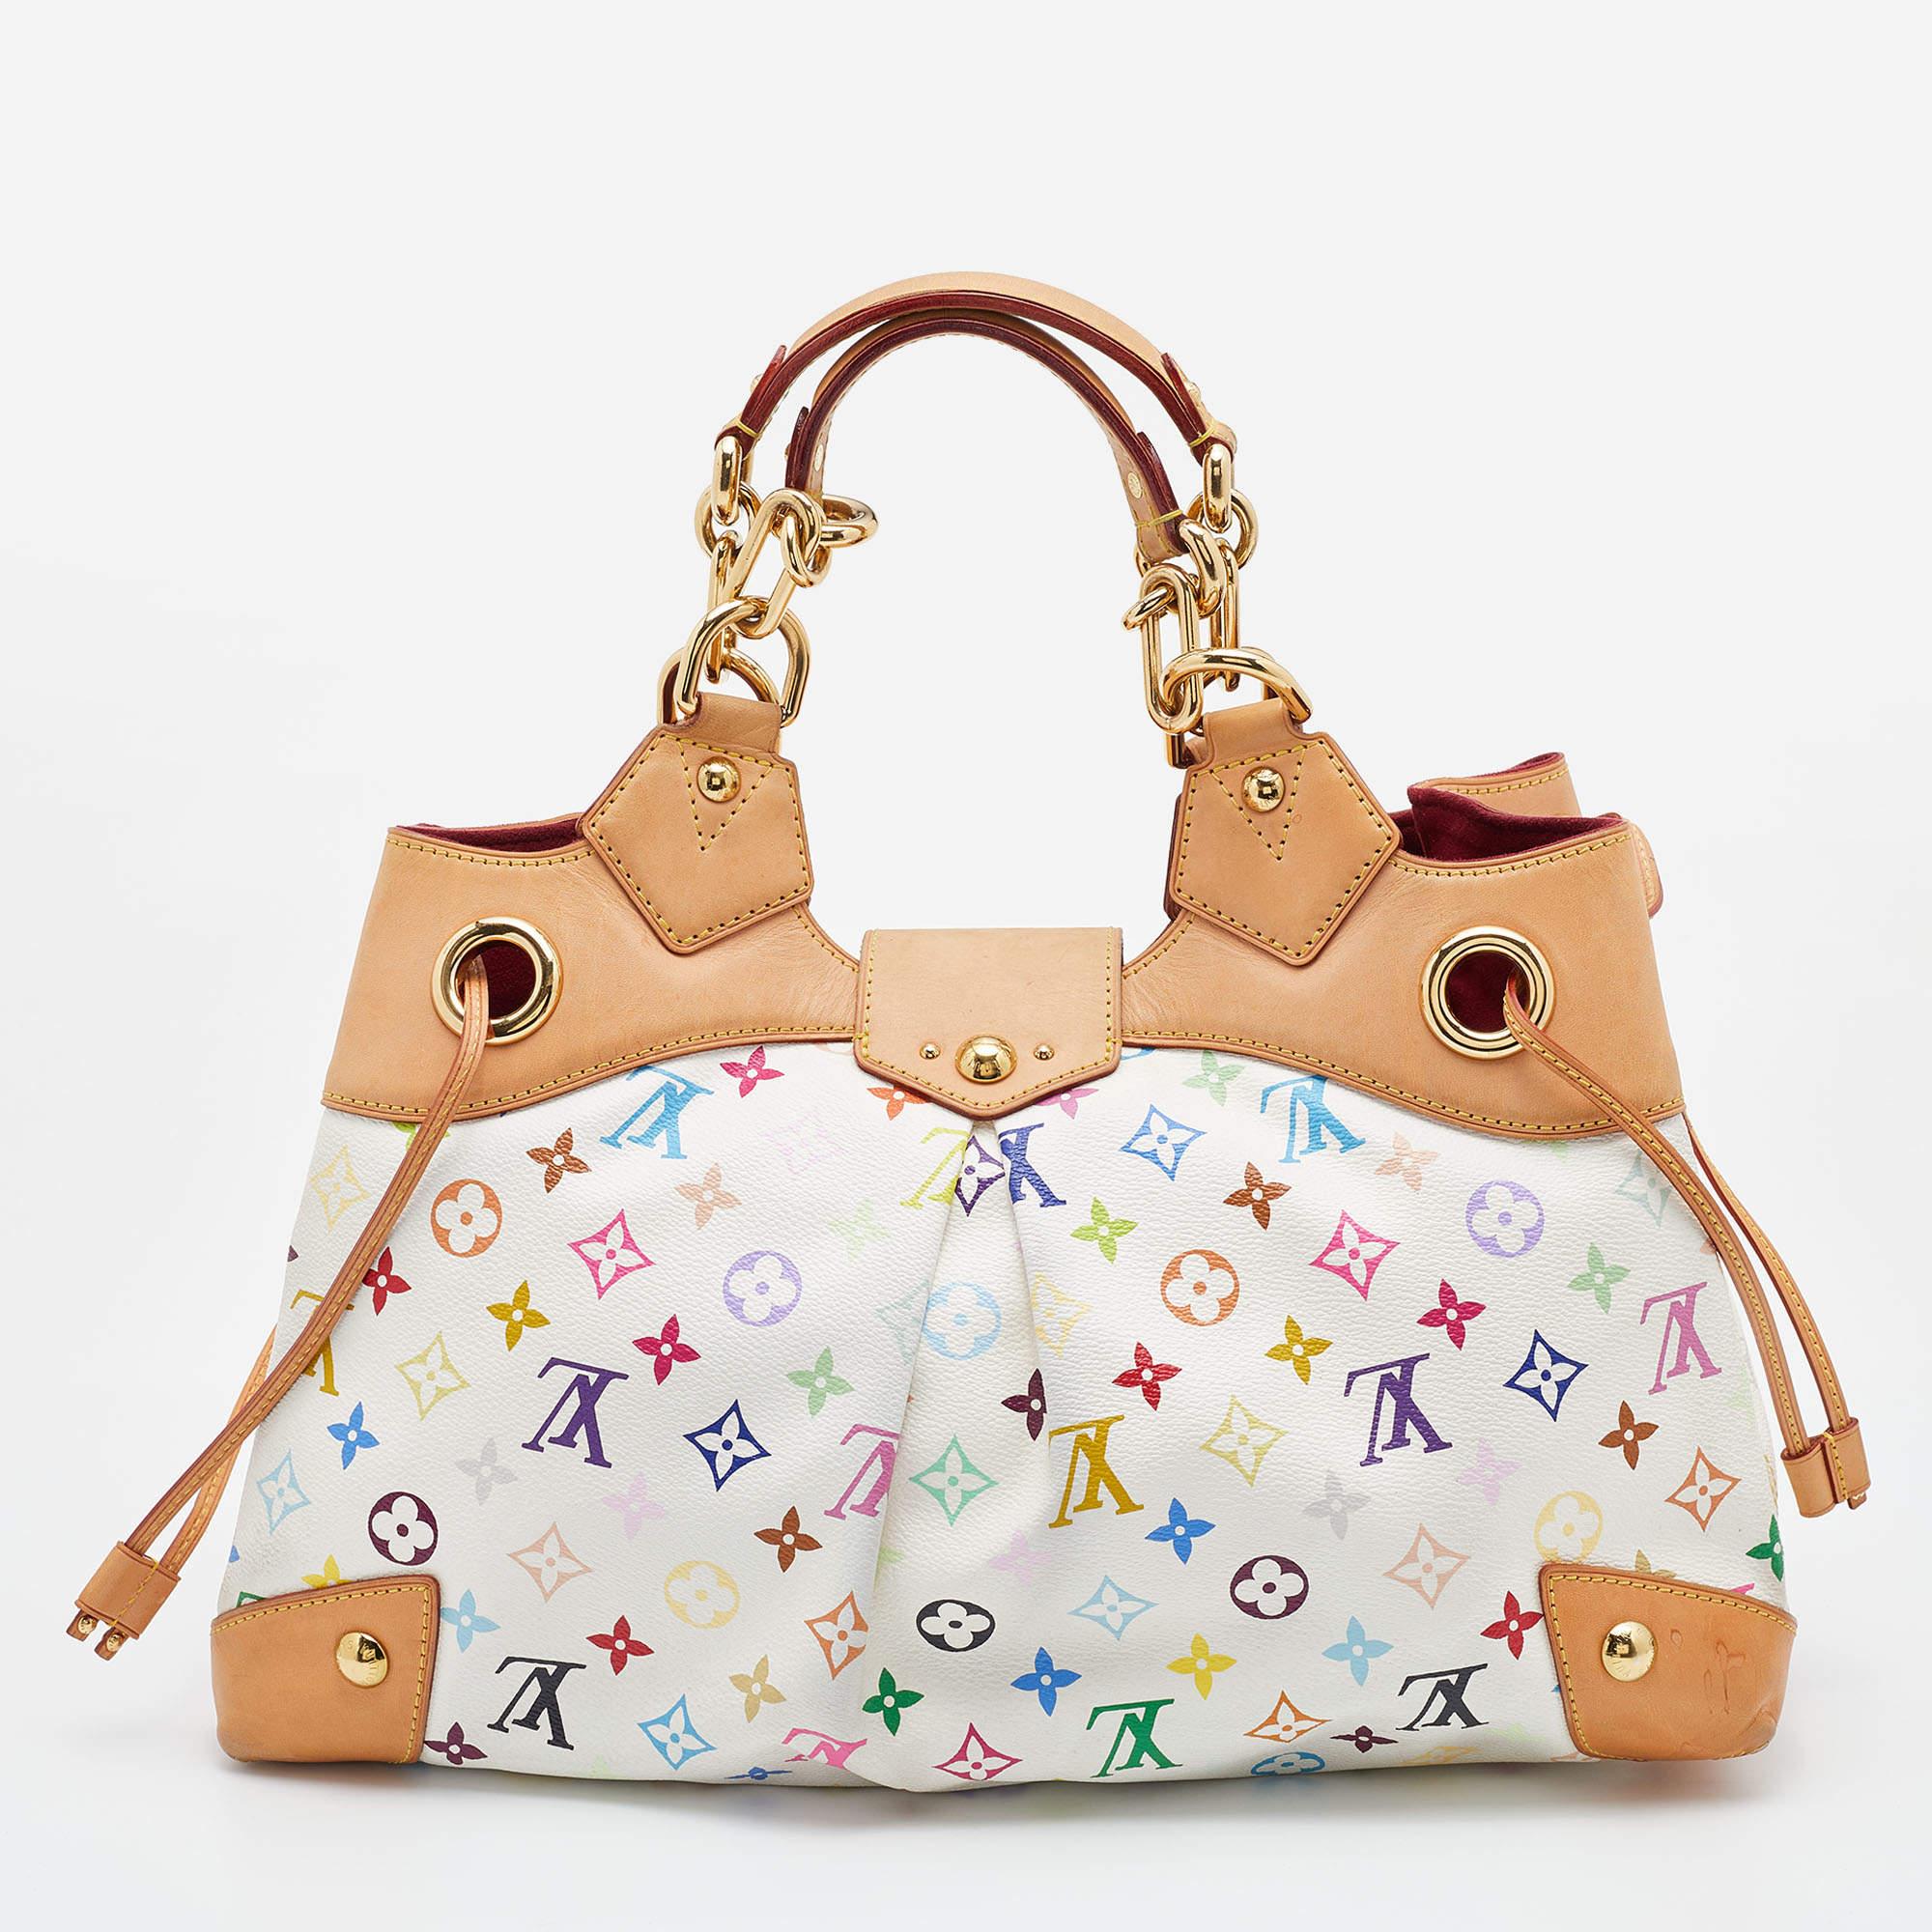 New Monogram Louis Vuitton Bags - 193 For Sale on 1stDibs